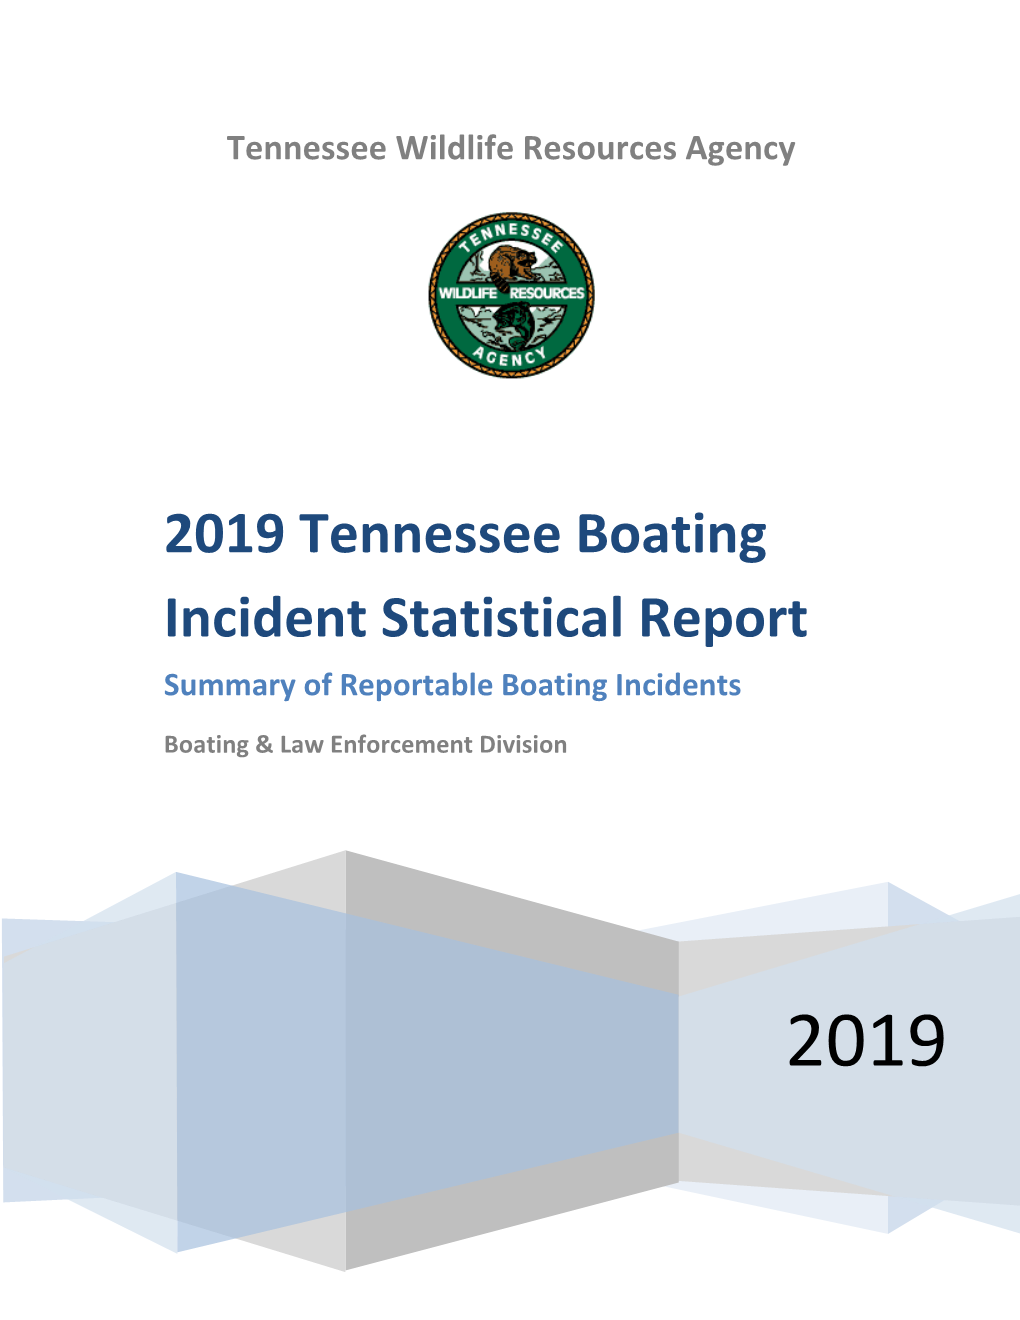 2019 Tennessee Boating Incident Statistical Report Executive Summary